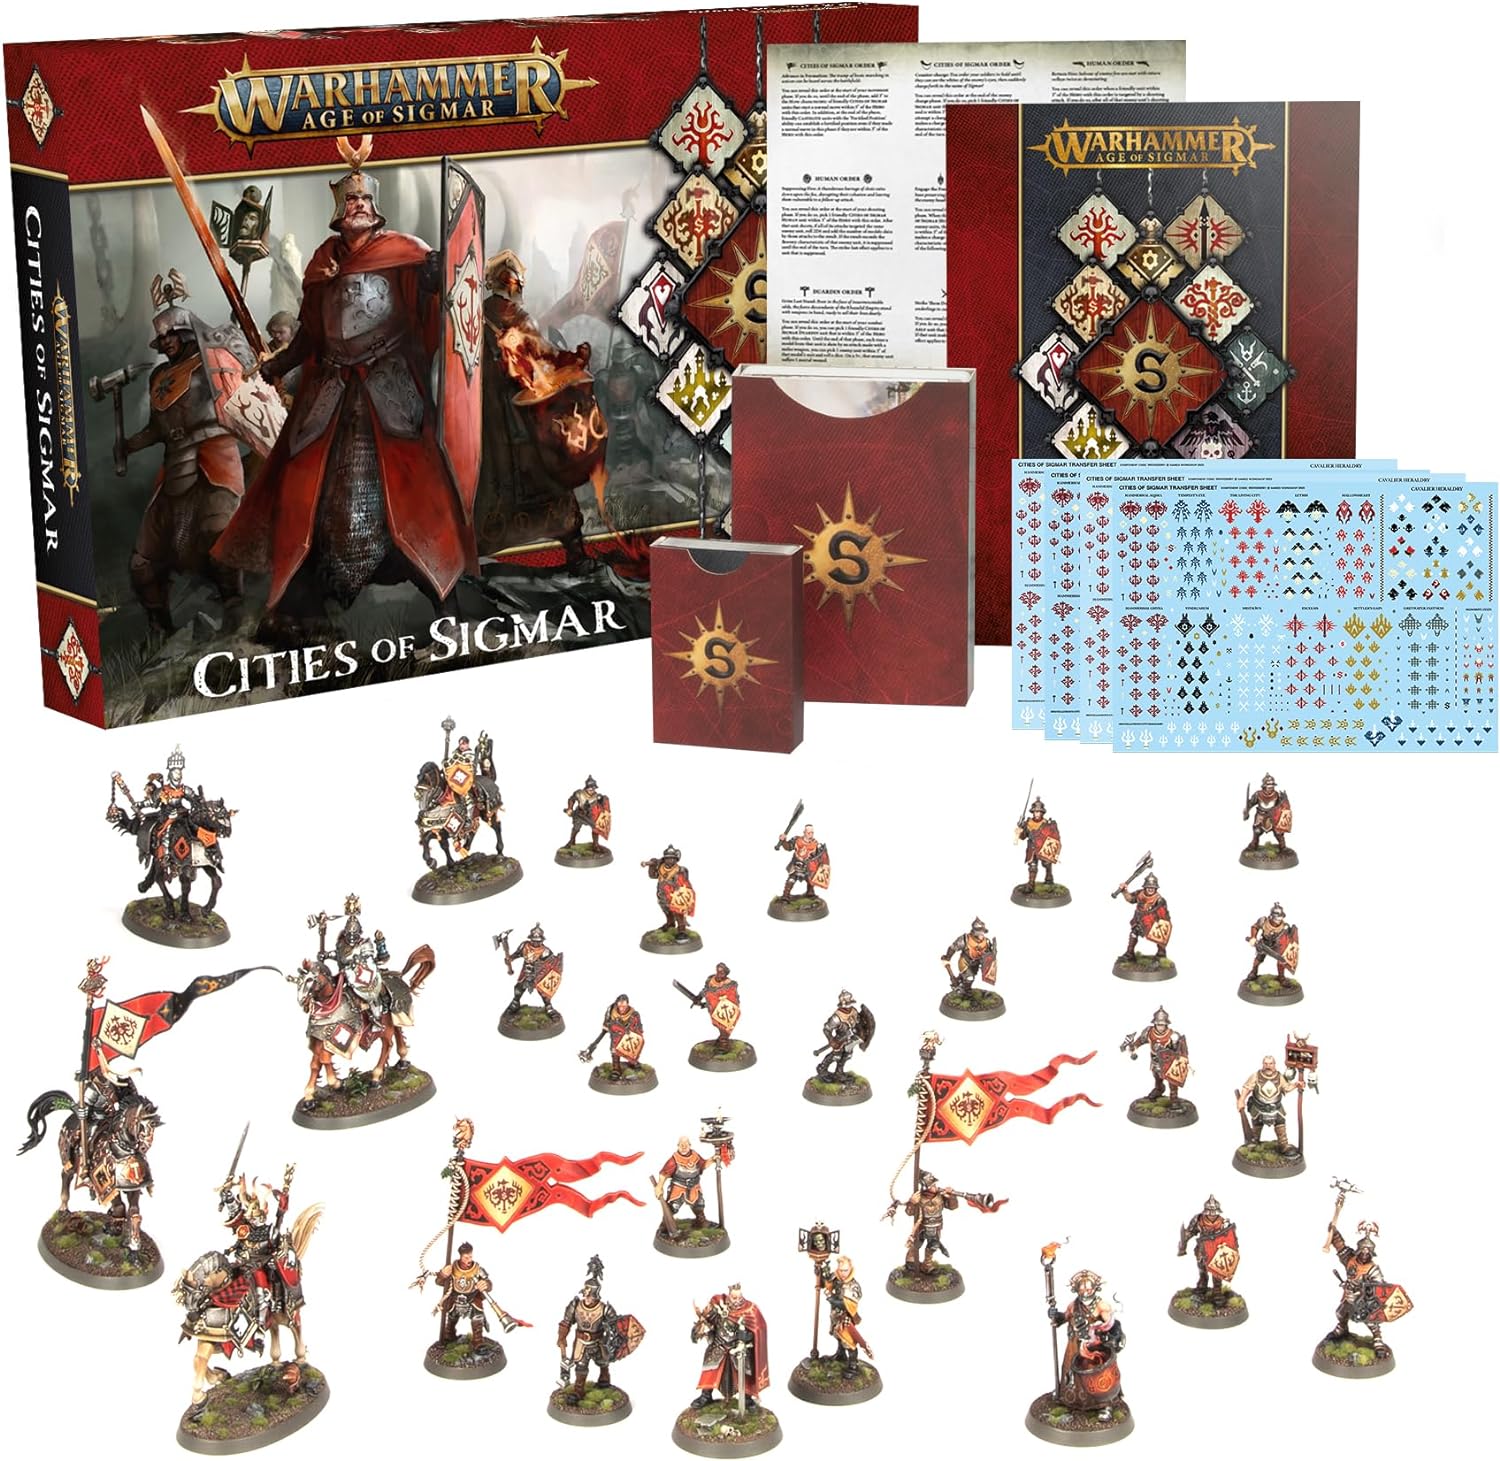 Games Workshop Warhammer - Age of Sigmar - Cities of Sigmar Army Set